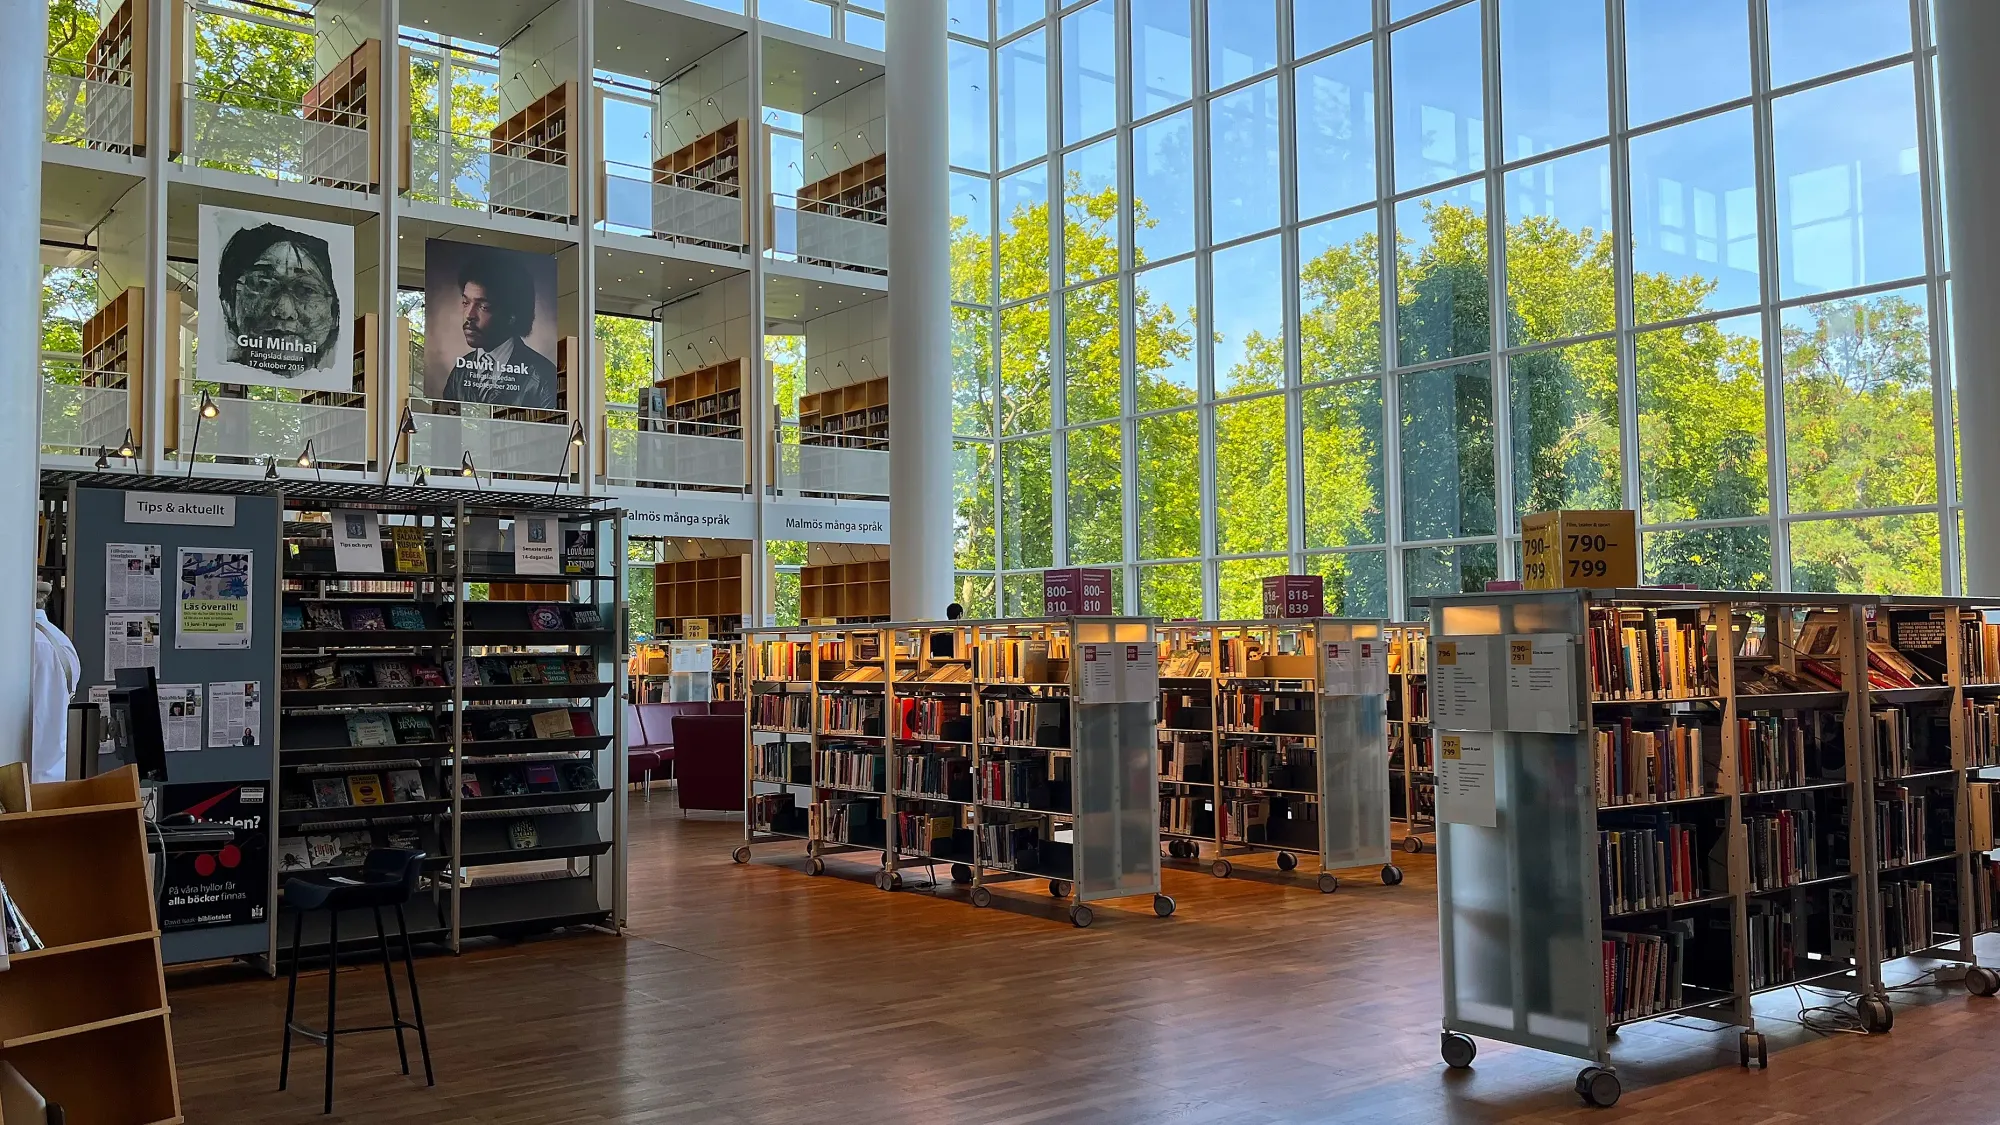 Two glass walls with rows of bookshelves